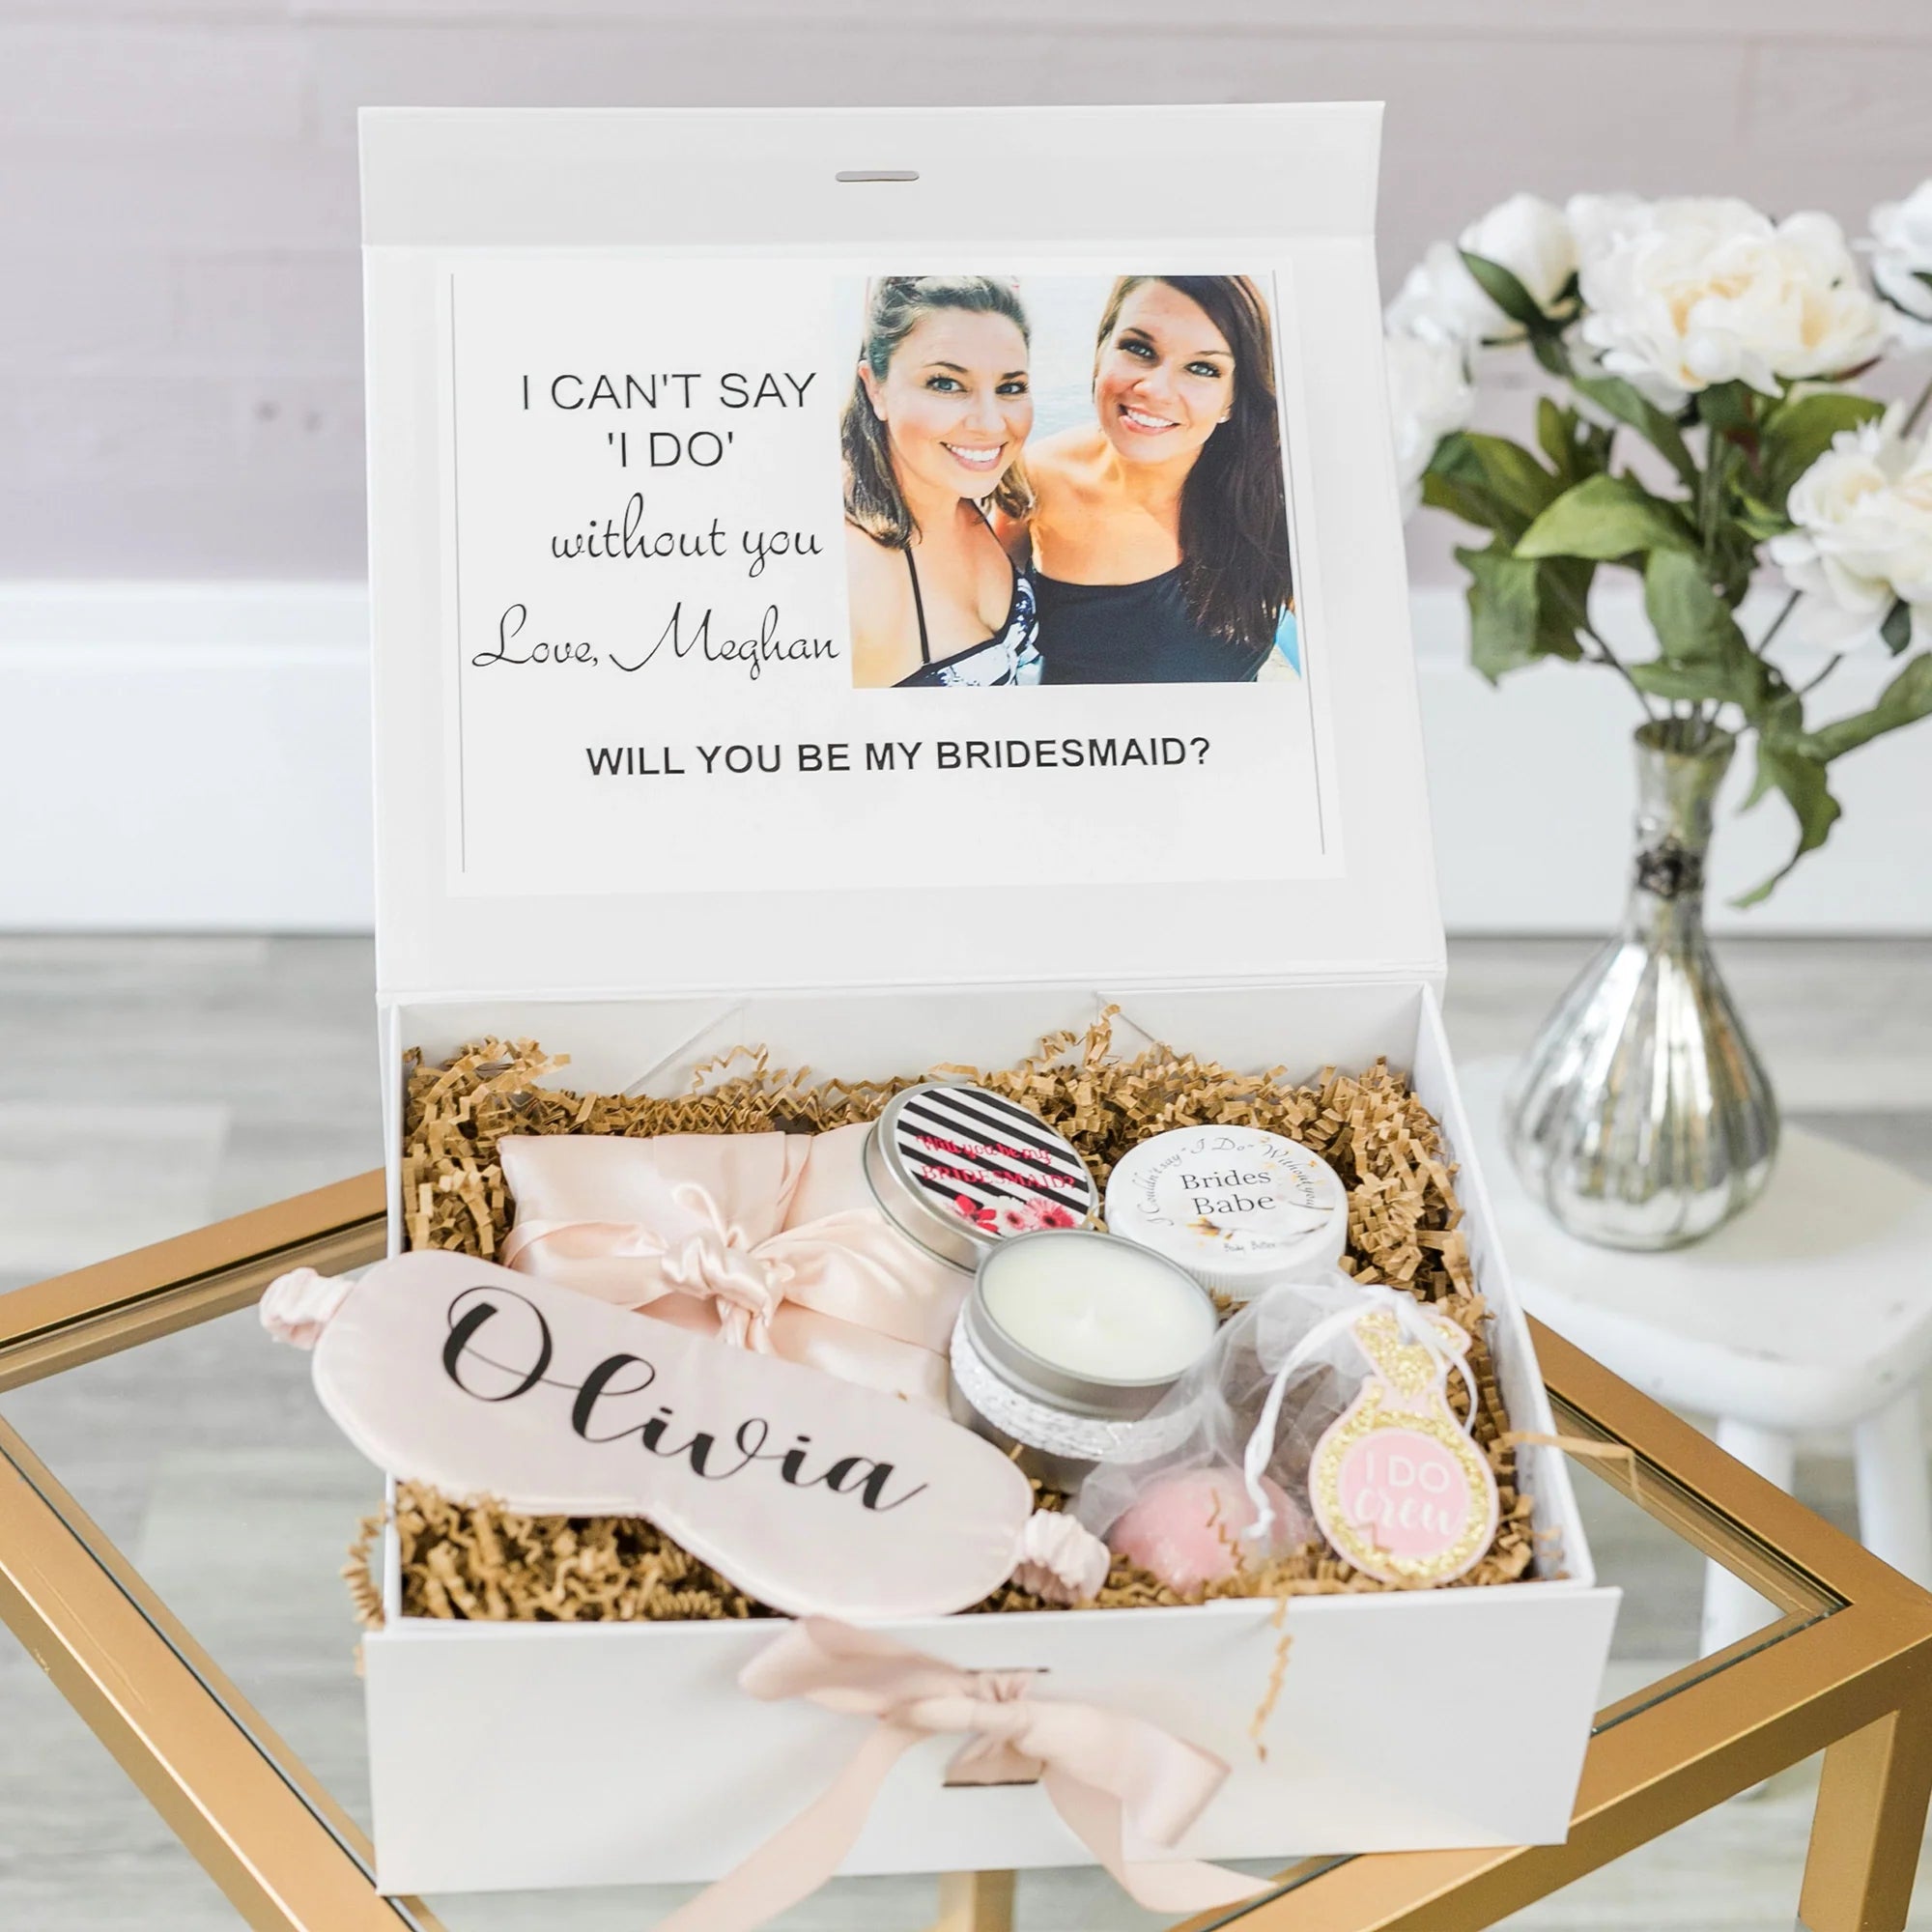 5 Must-Have Items for the Perfect Bridesmaid Proposal Box